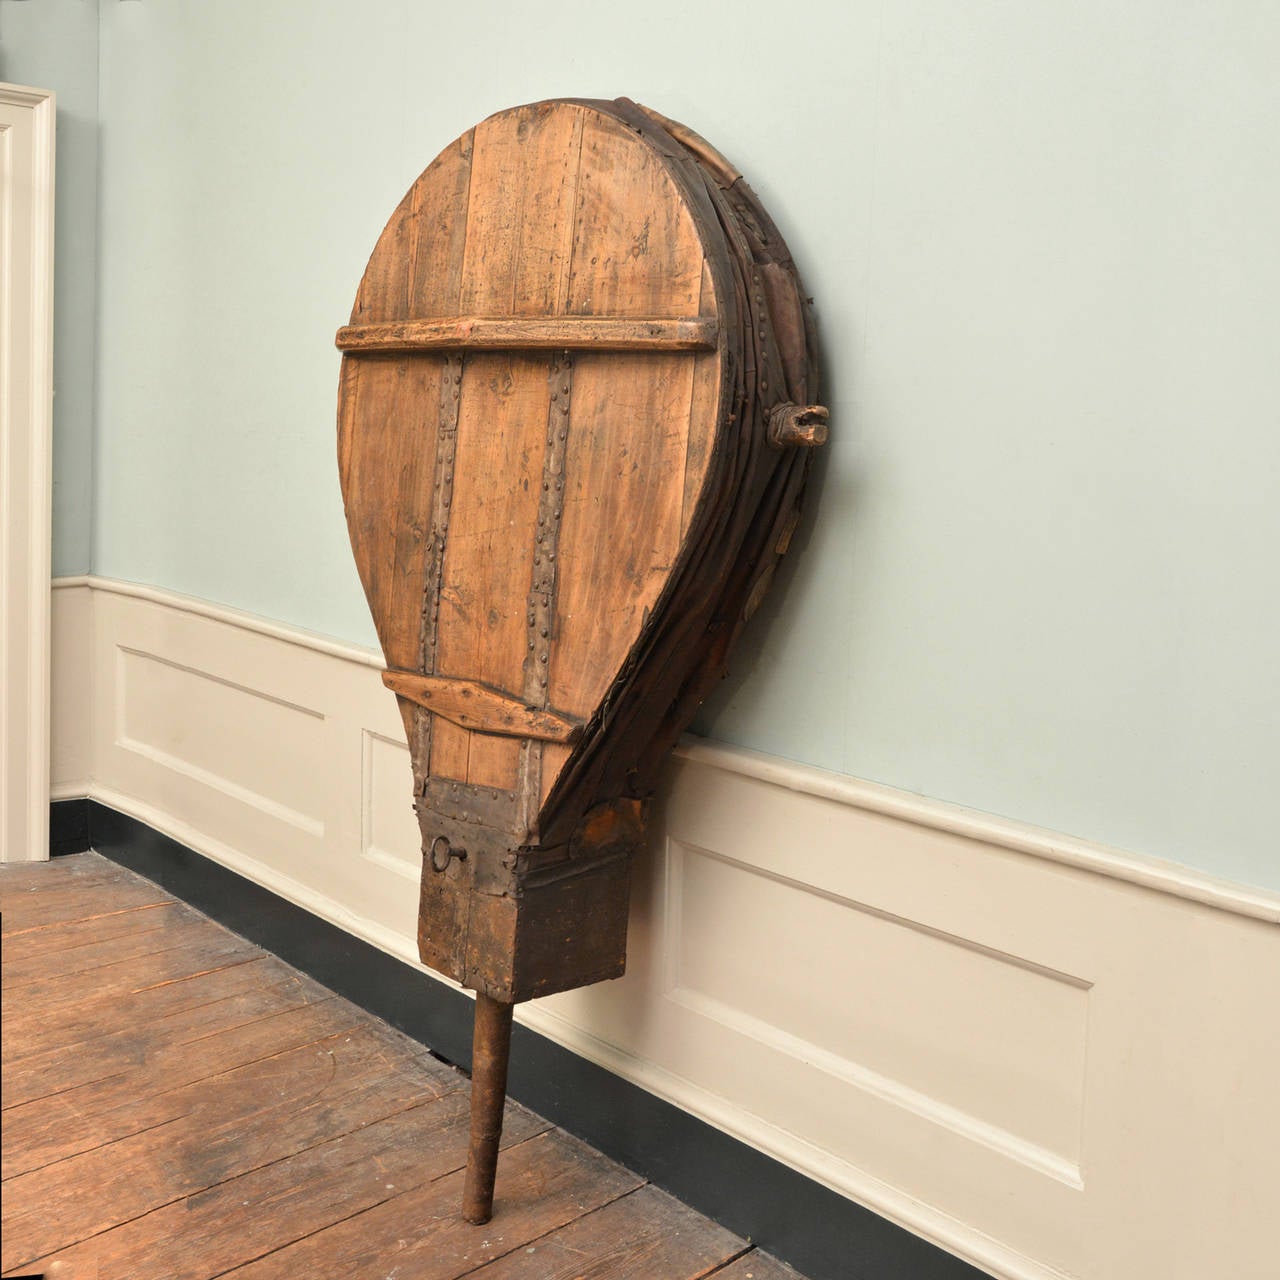 A pair of huge foundry bellows. Deal, leather and iron. 

Available to view at Brunswick House, London

106cm wide, 30cm deep, 185cm long .